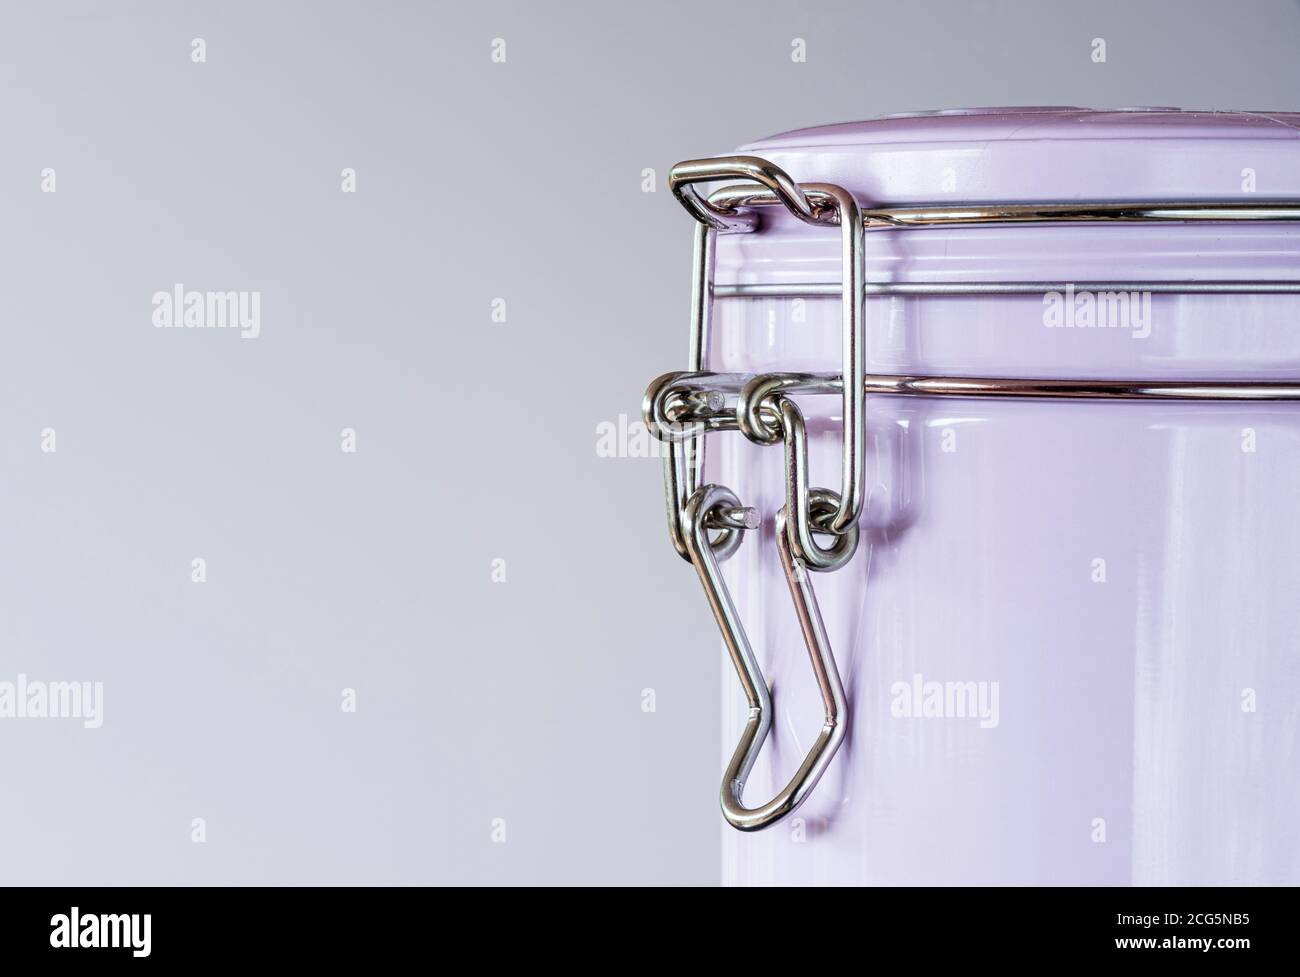 Canister with bail handle or wire ball clasp fastening on lid. Stock Photo